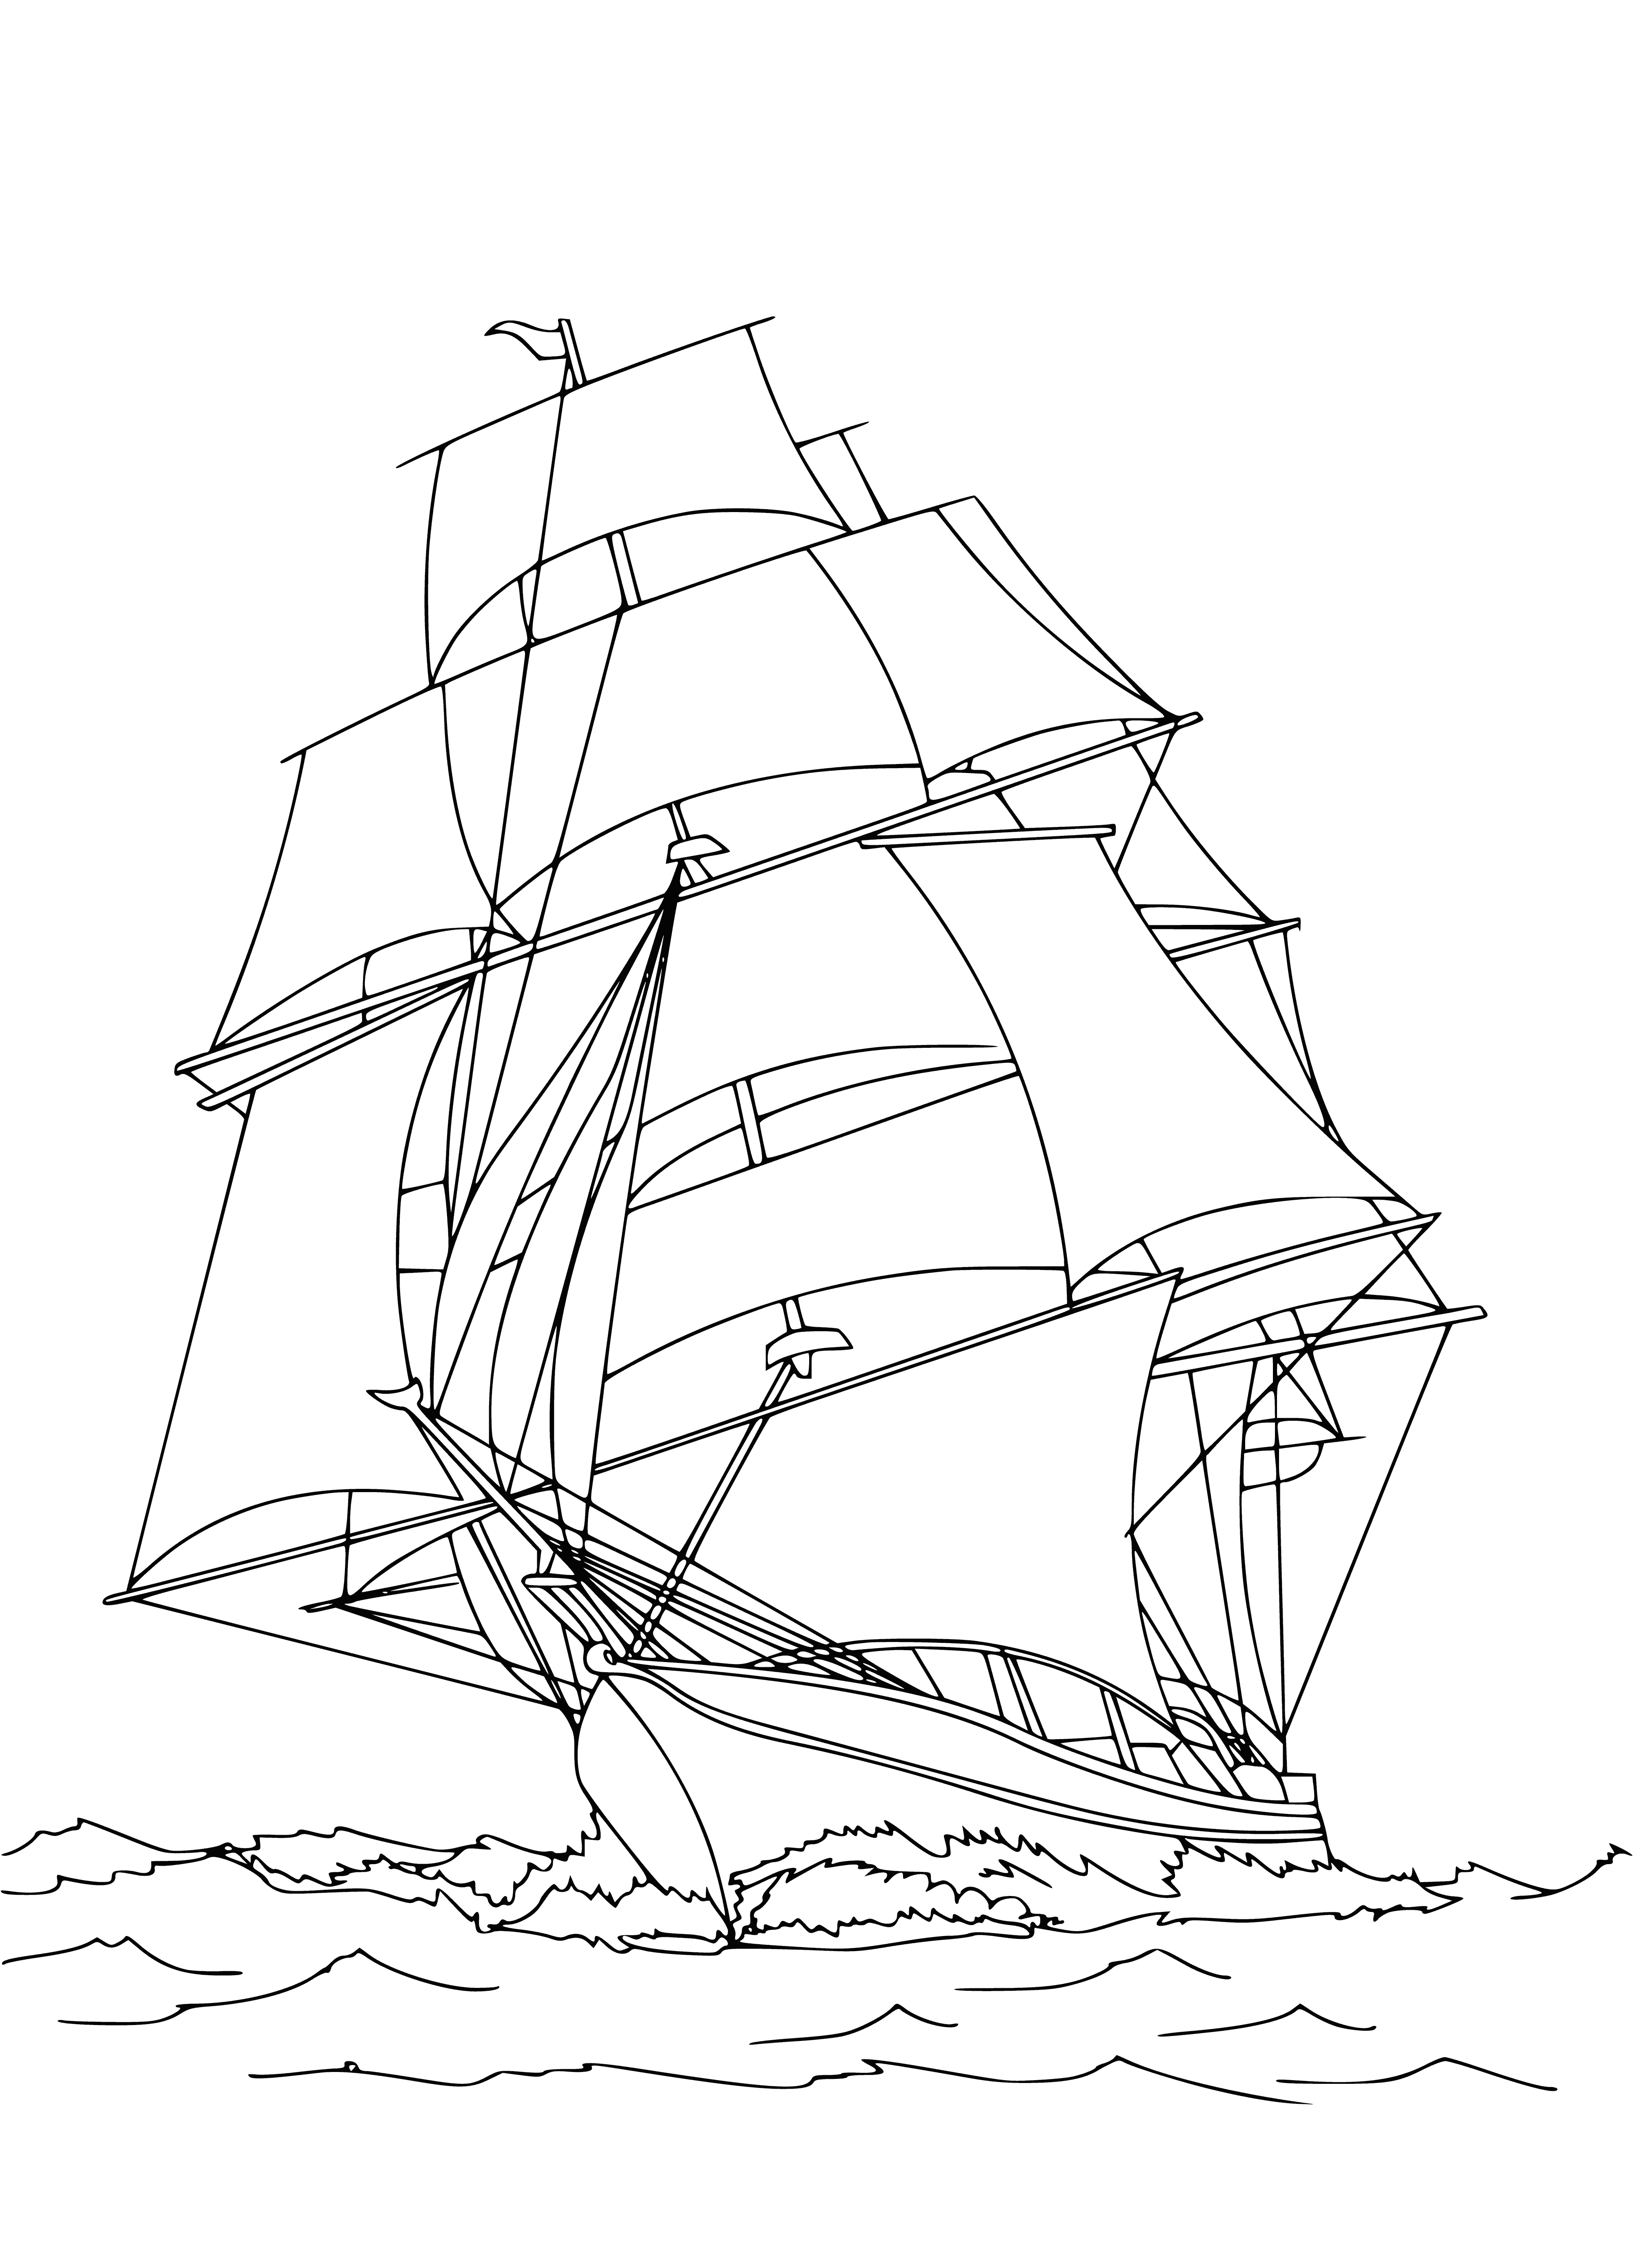 Sailing vessel coloring page